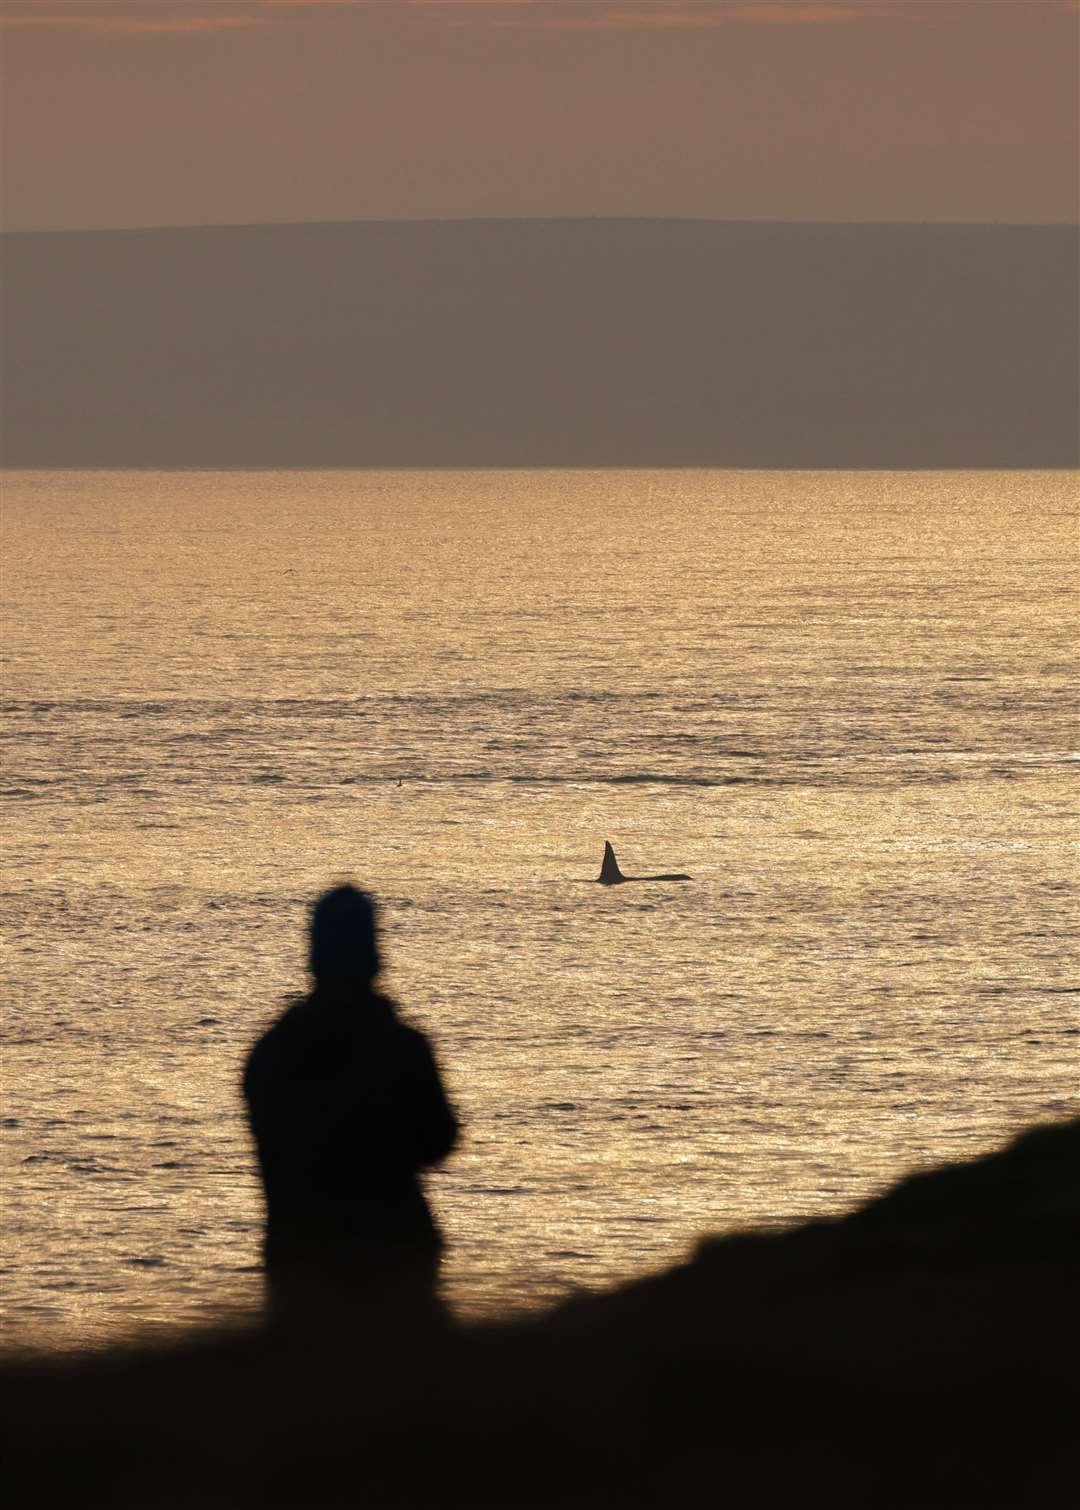 James Copeland watching an orca at dawn at St John's Point. Picture: Steve Truluck At Sea